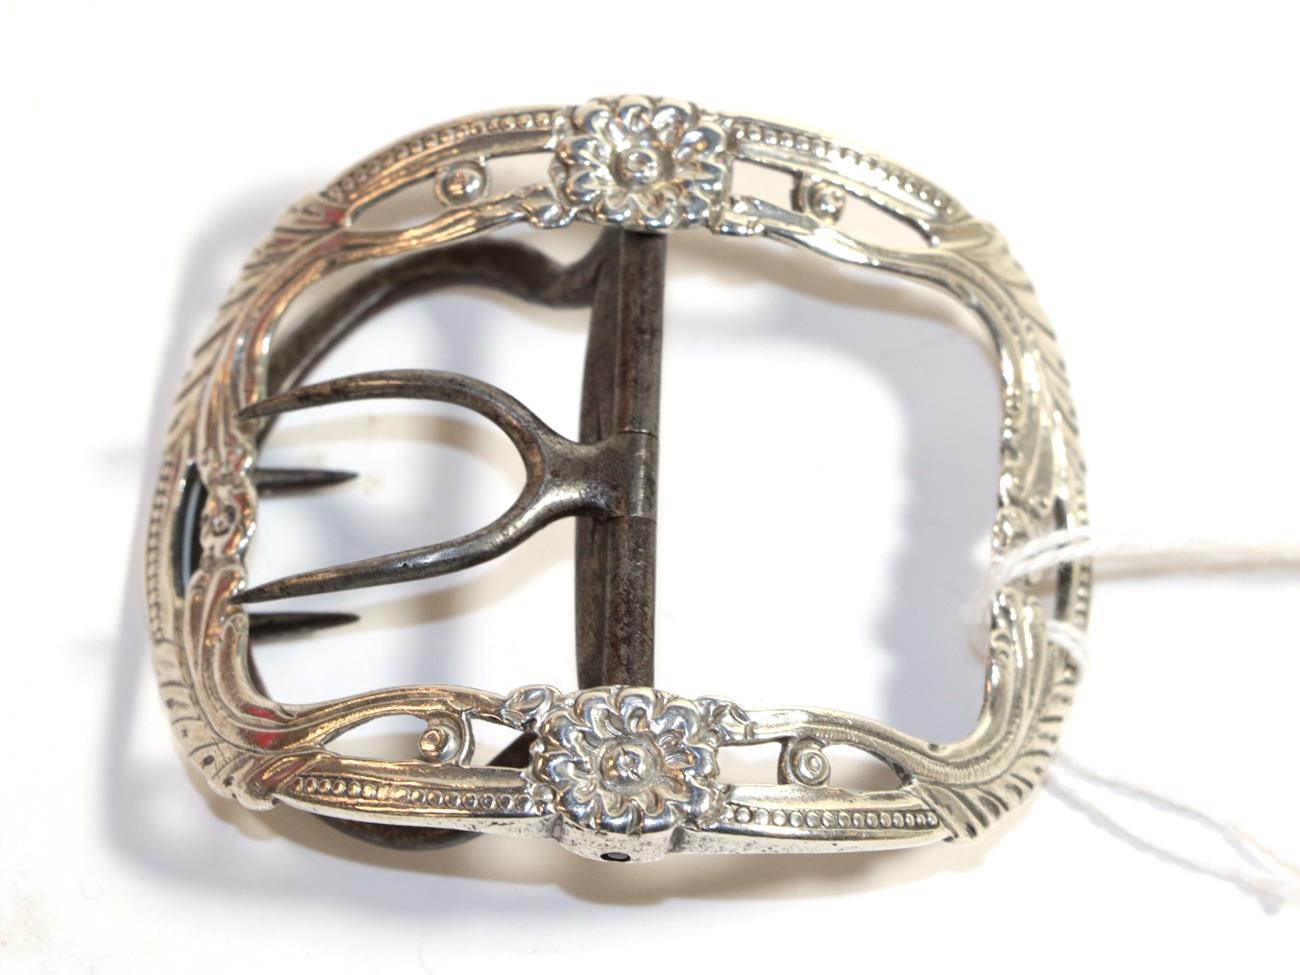 Lot 289 - A George III silver shoe buckle, George Burrows, London, circa 1780, the frame of openwork...